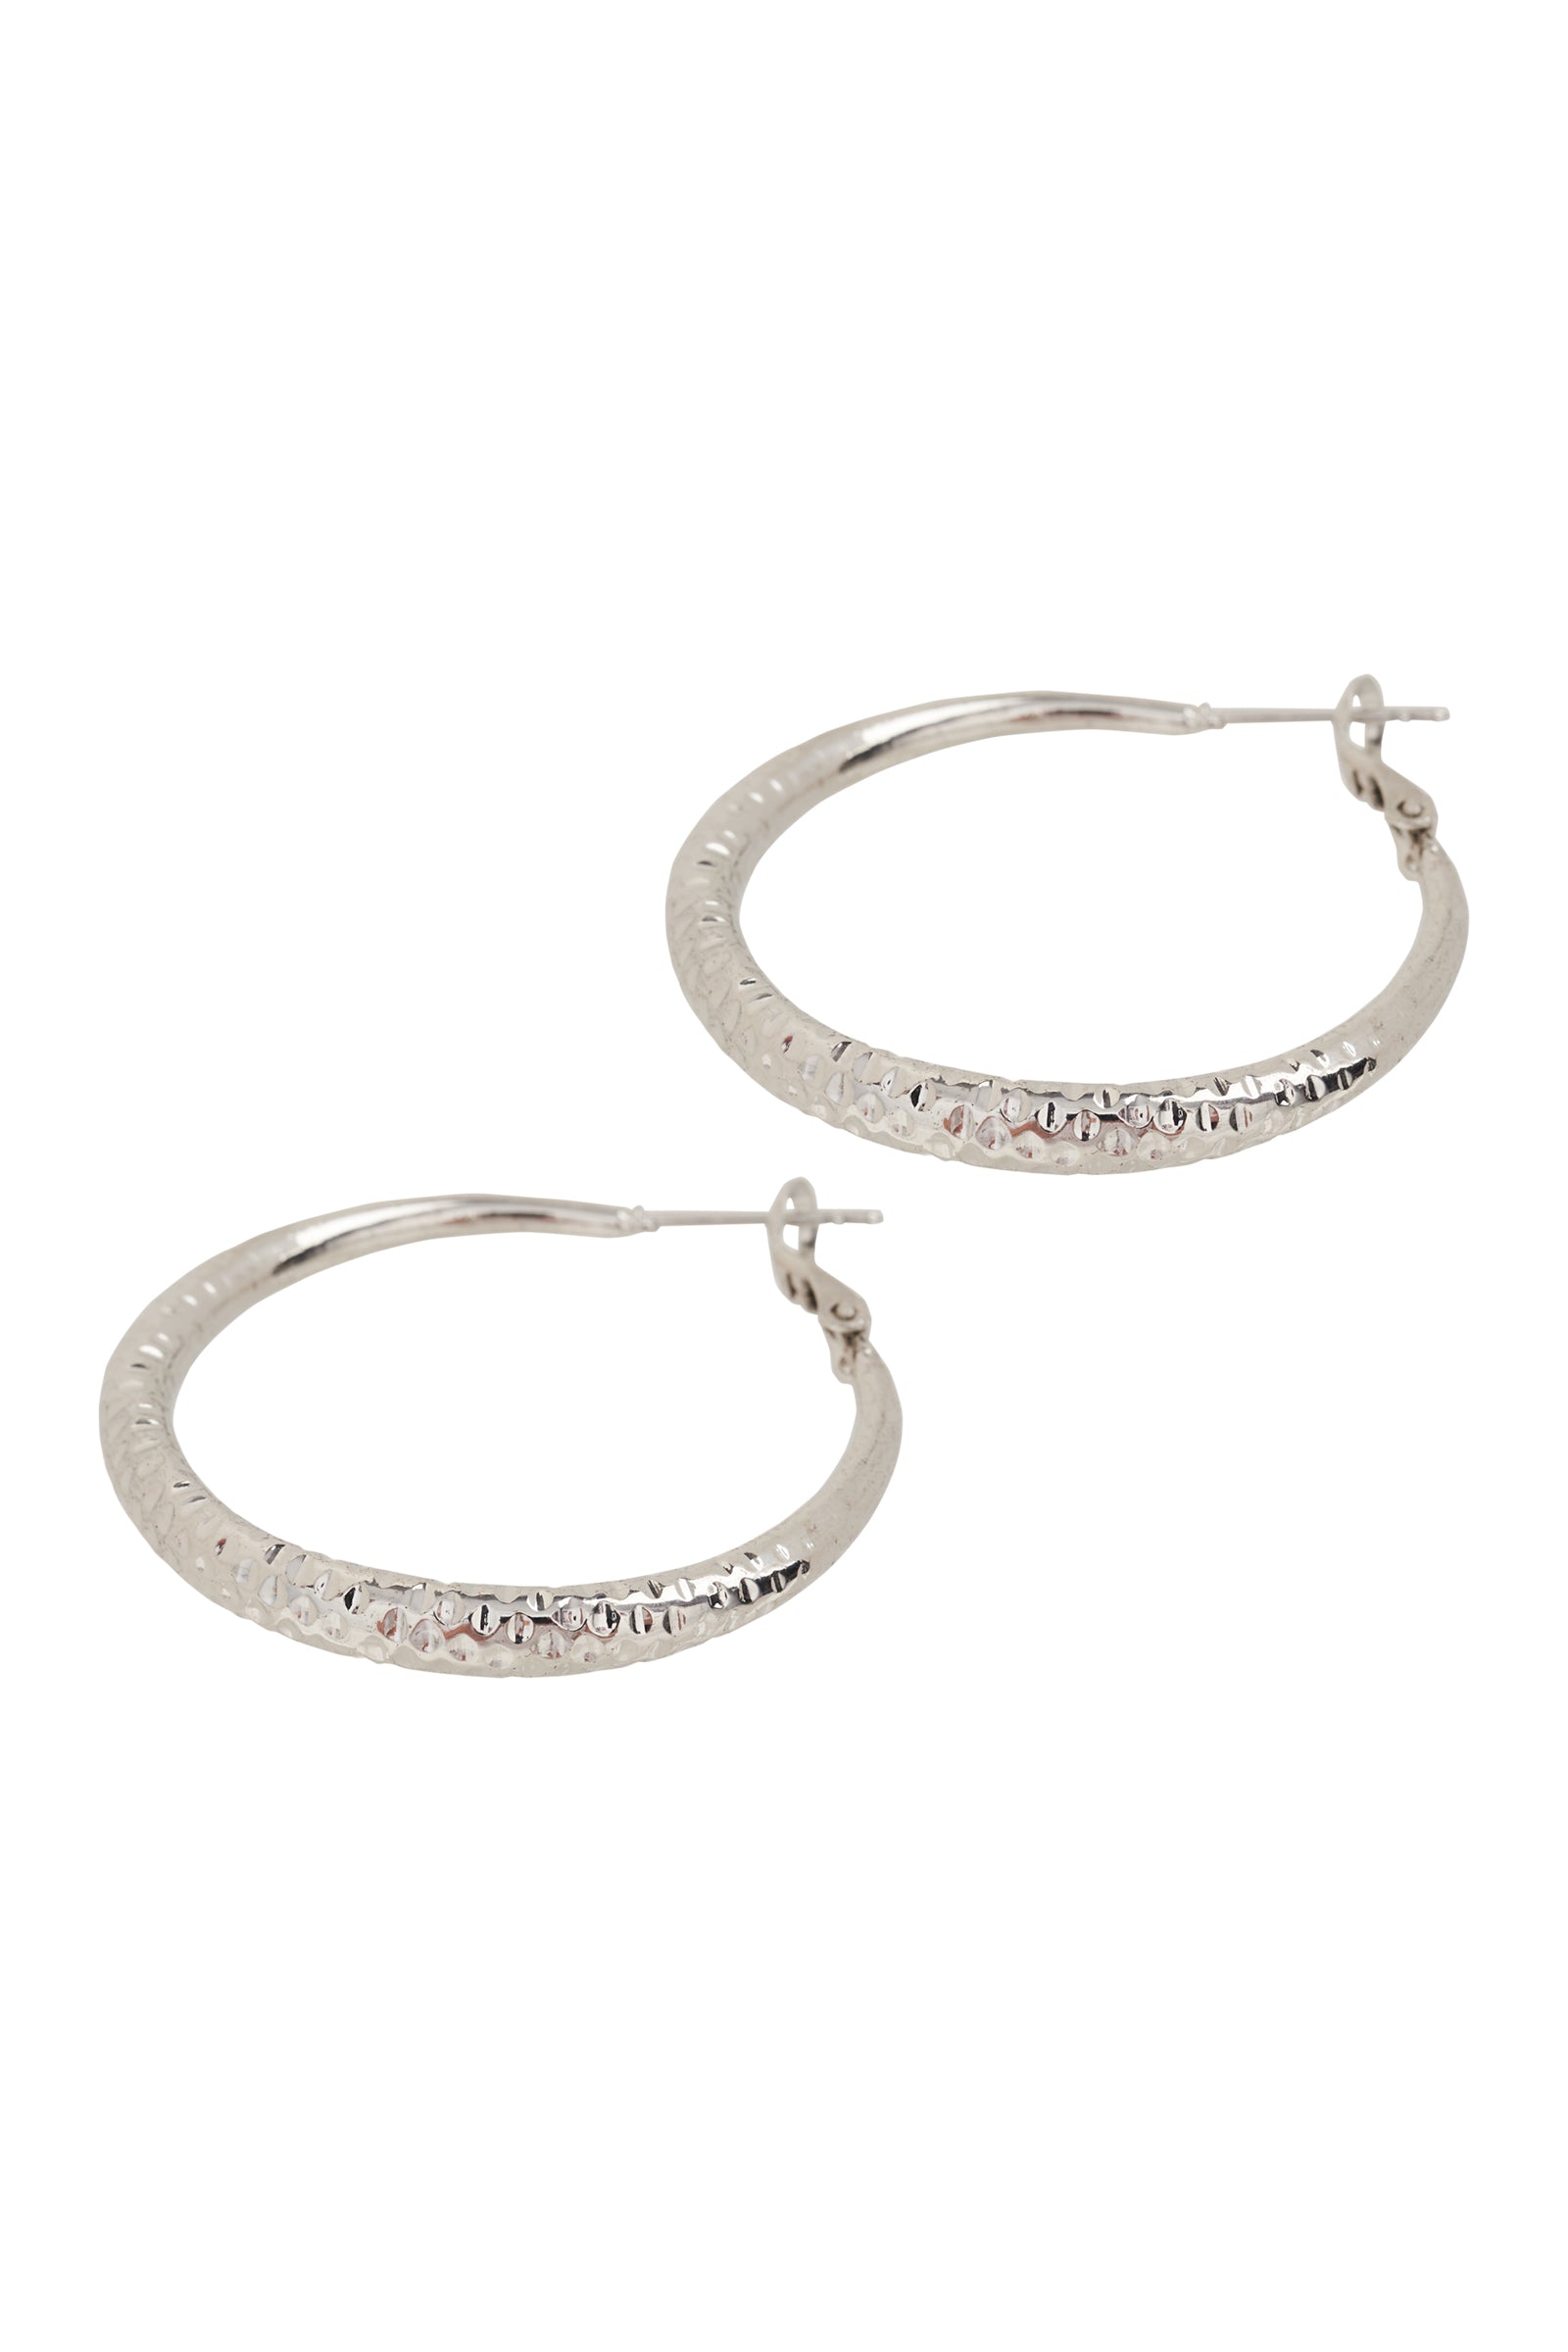 Norse Textured Hoop - Silver - eb&ive Earring